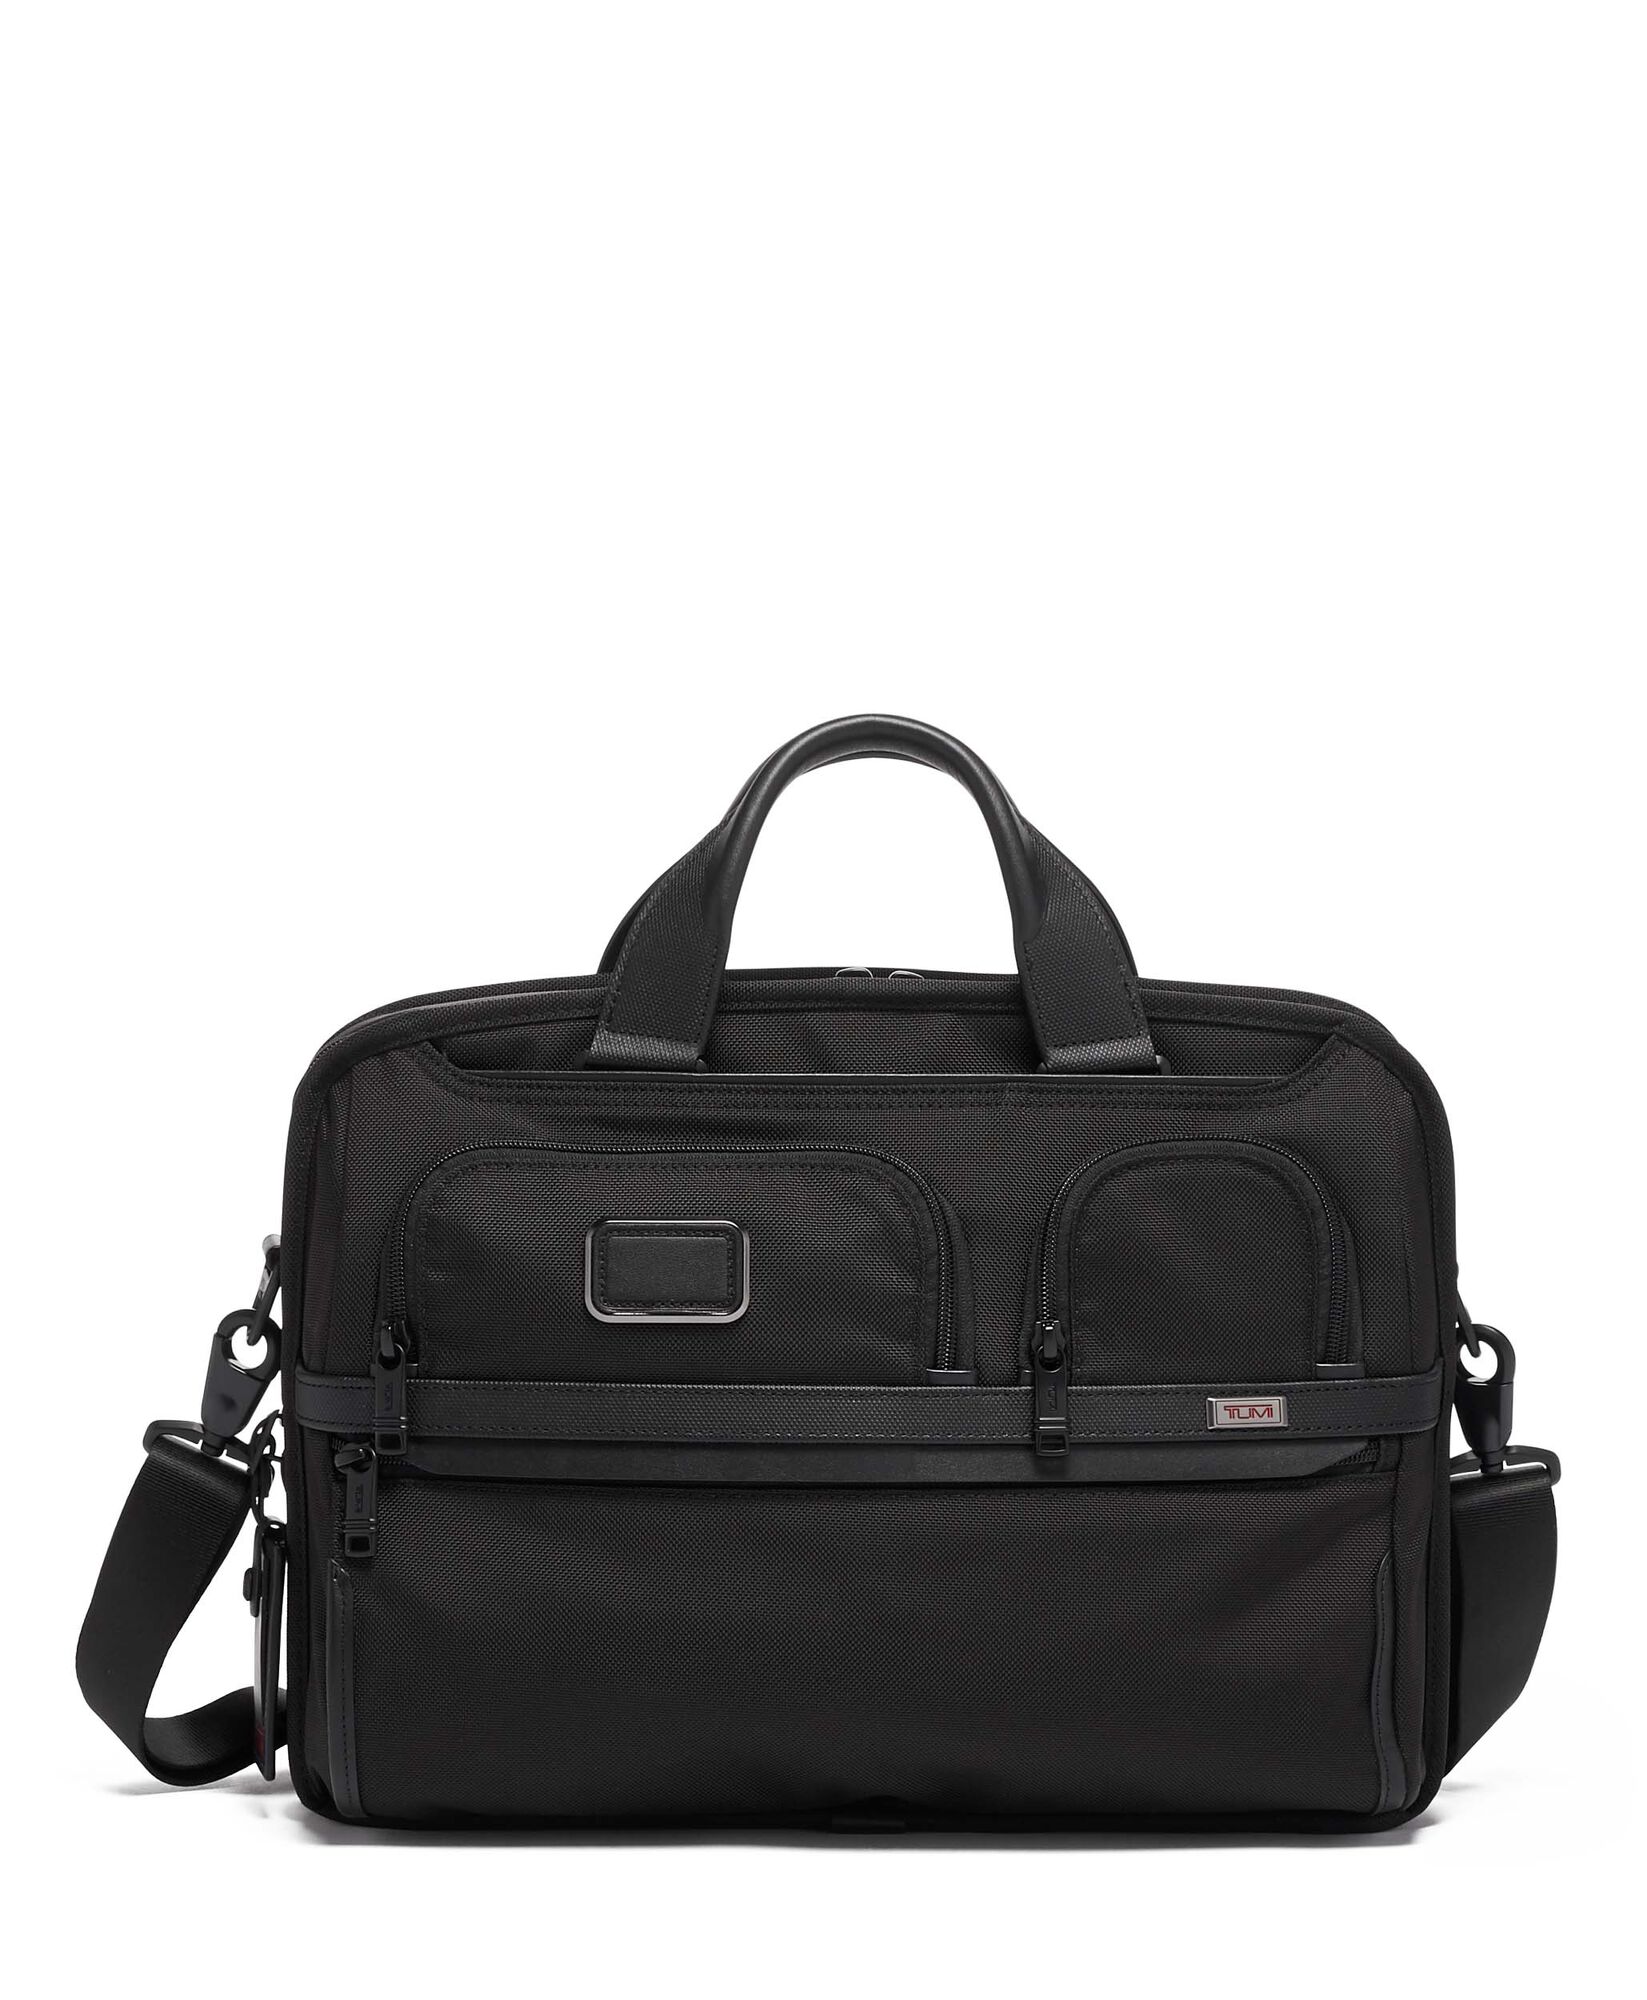 [View 36+] Tumi Brown Leather Laptop Bag